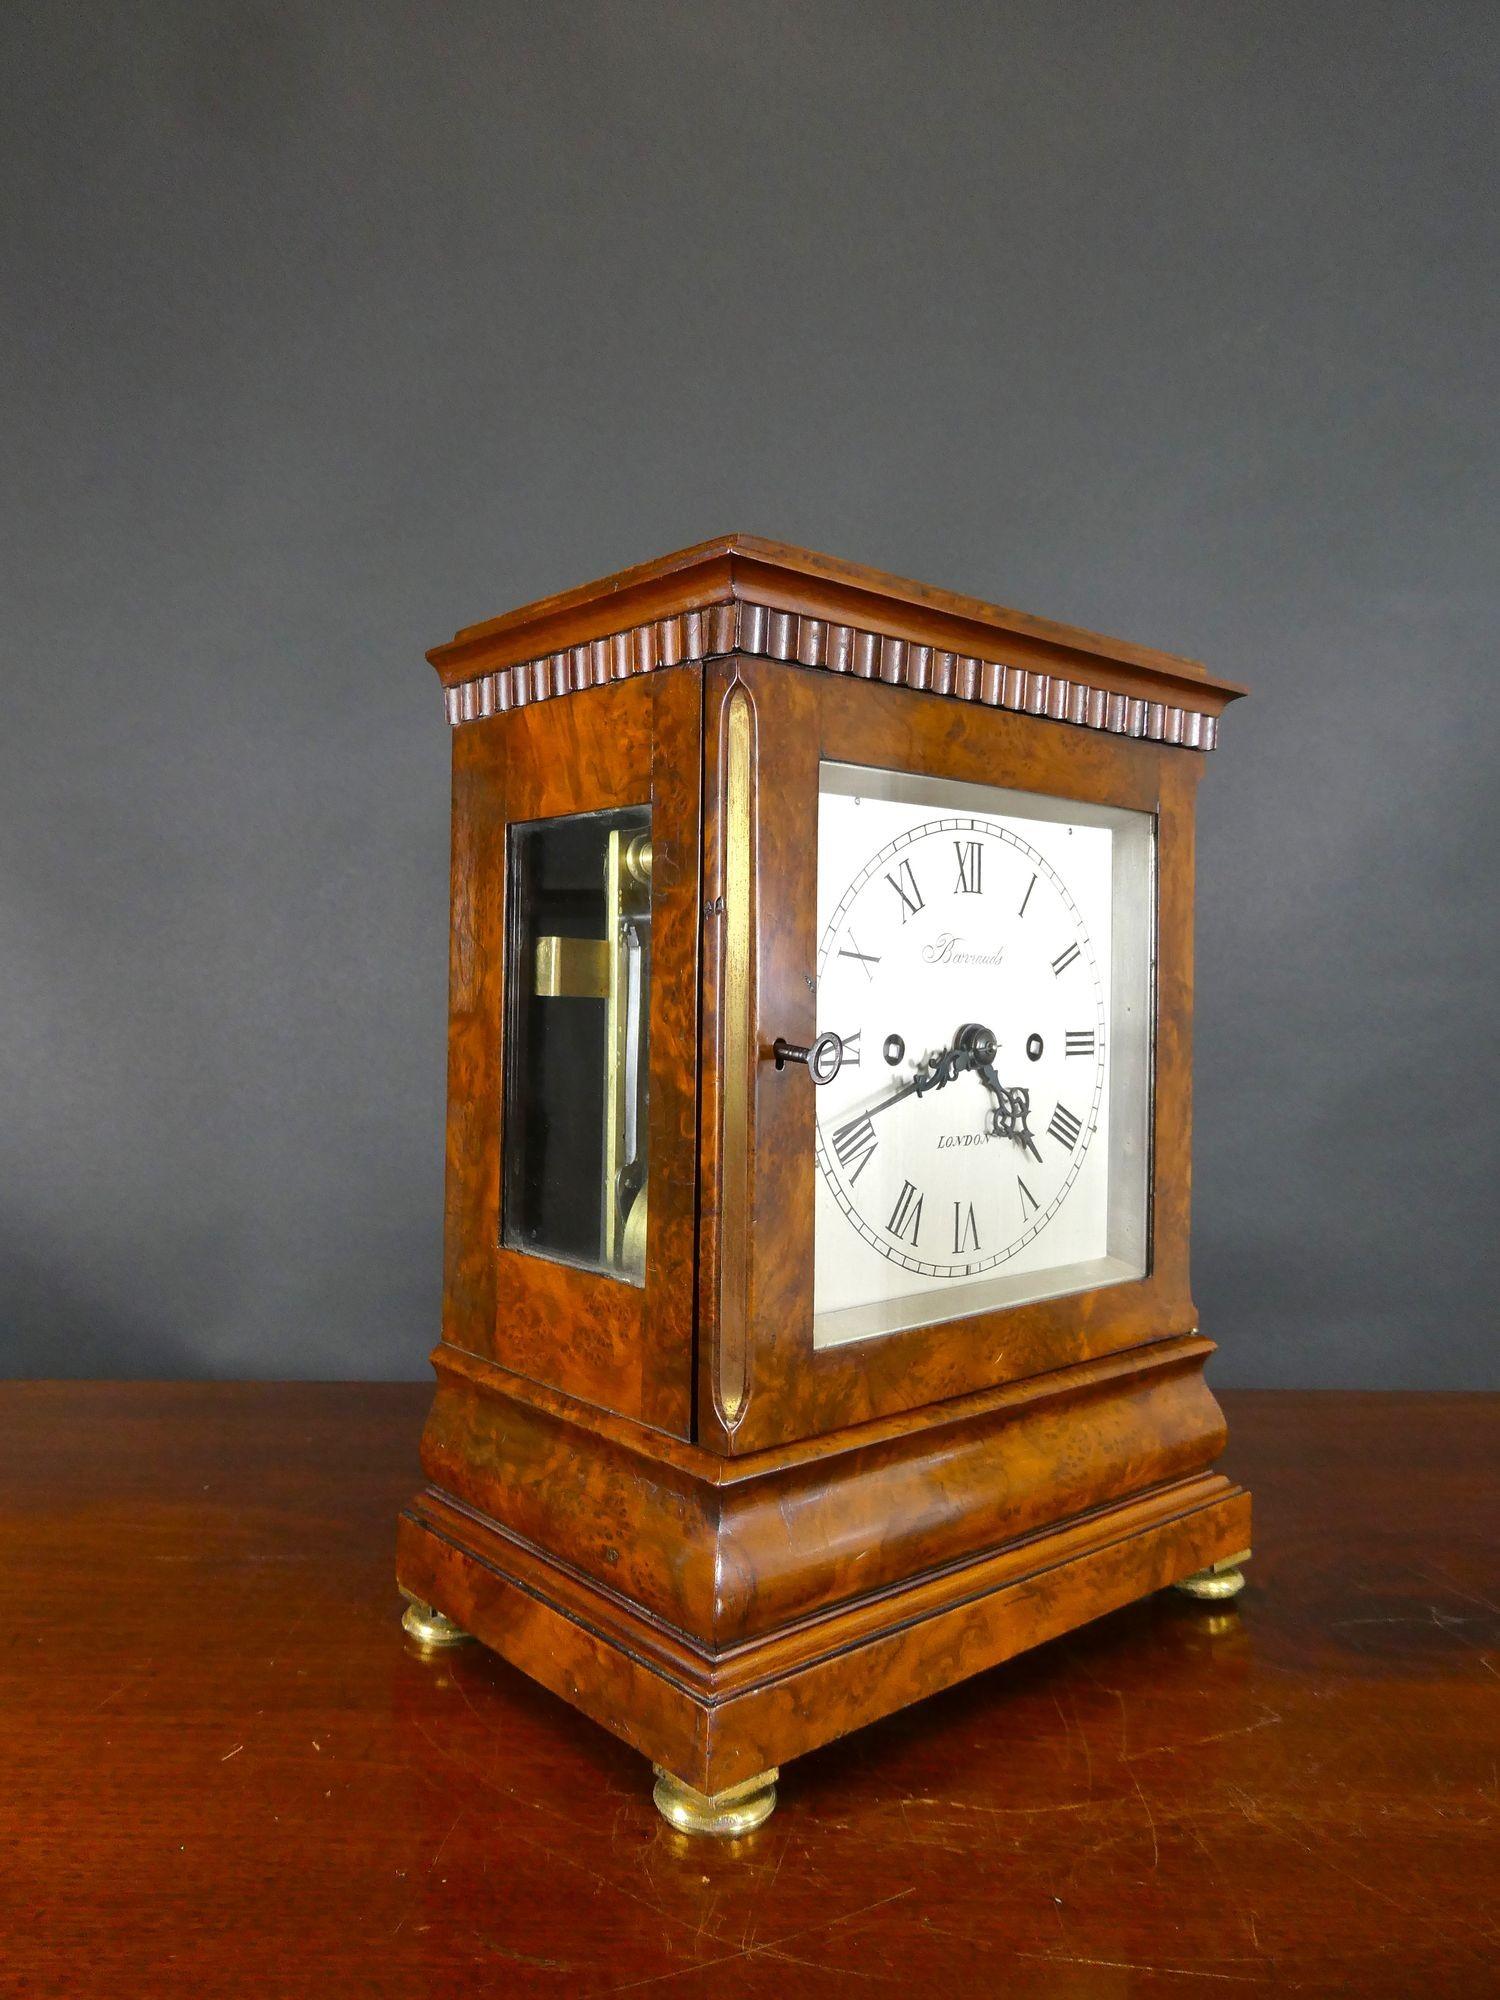 Regency Walnut Library Bracket Clock by Barrauds, London

Finely figured walnut 5 glass case with bevelled glass throughout, moulded plinth with stepped base resting on four brass bun feet. Dentil moulding decoration and canted brass corners.
Front